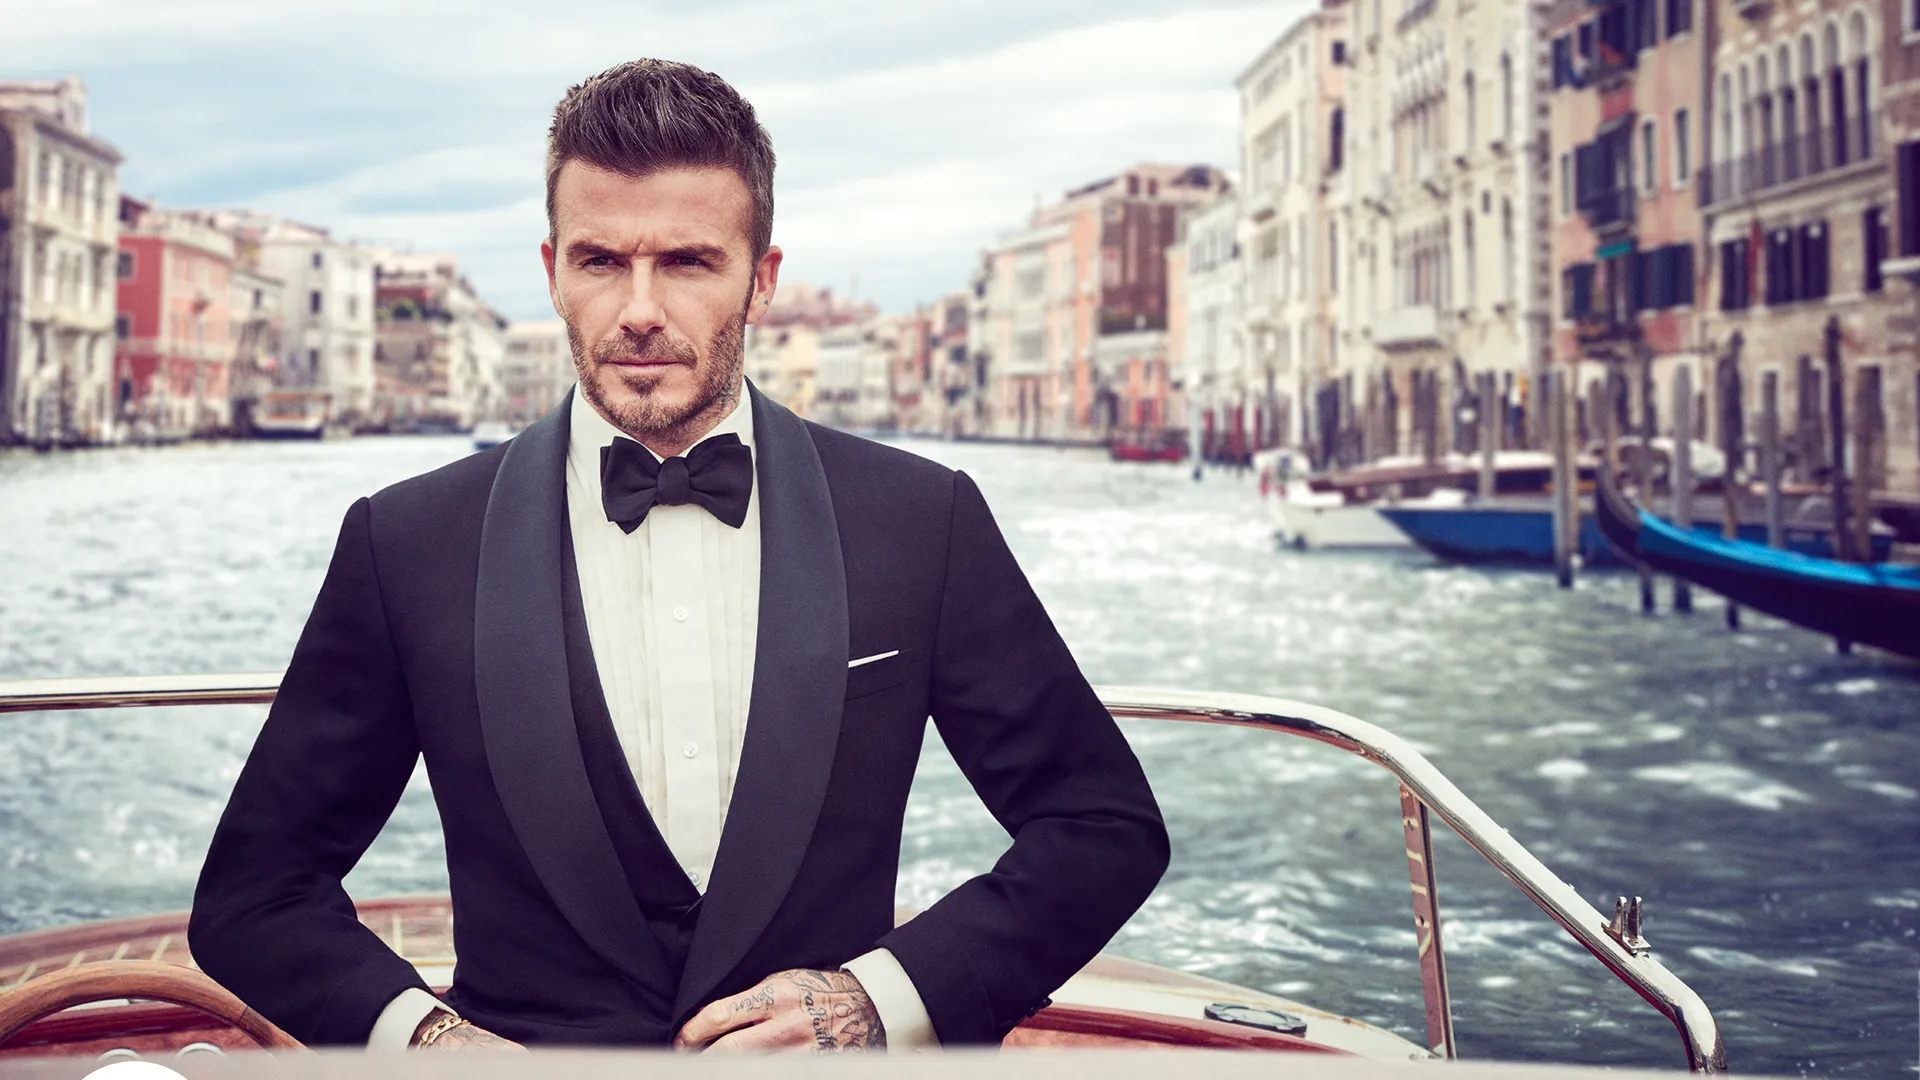 Fashion, Style, And Redefining Masculinity: The David Beckham Effect